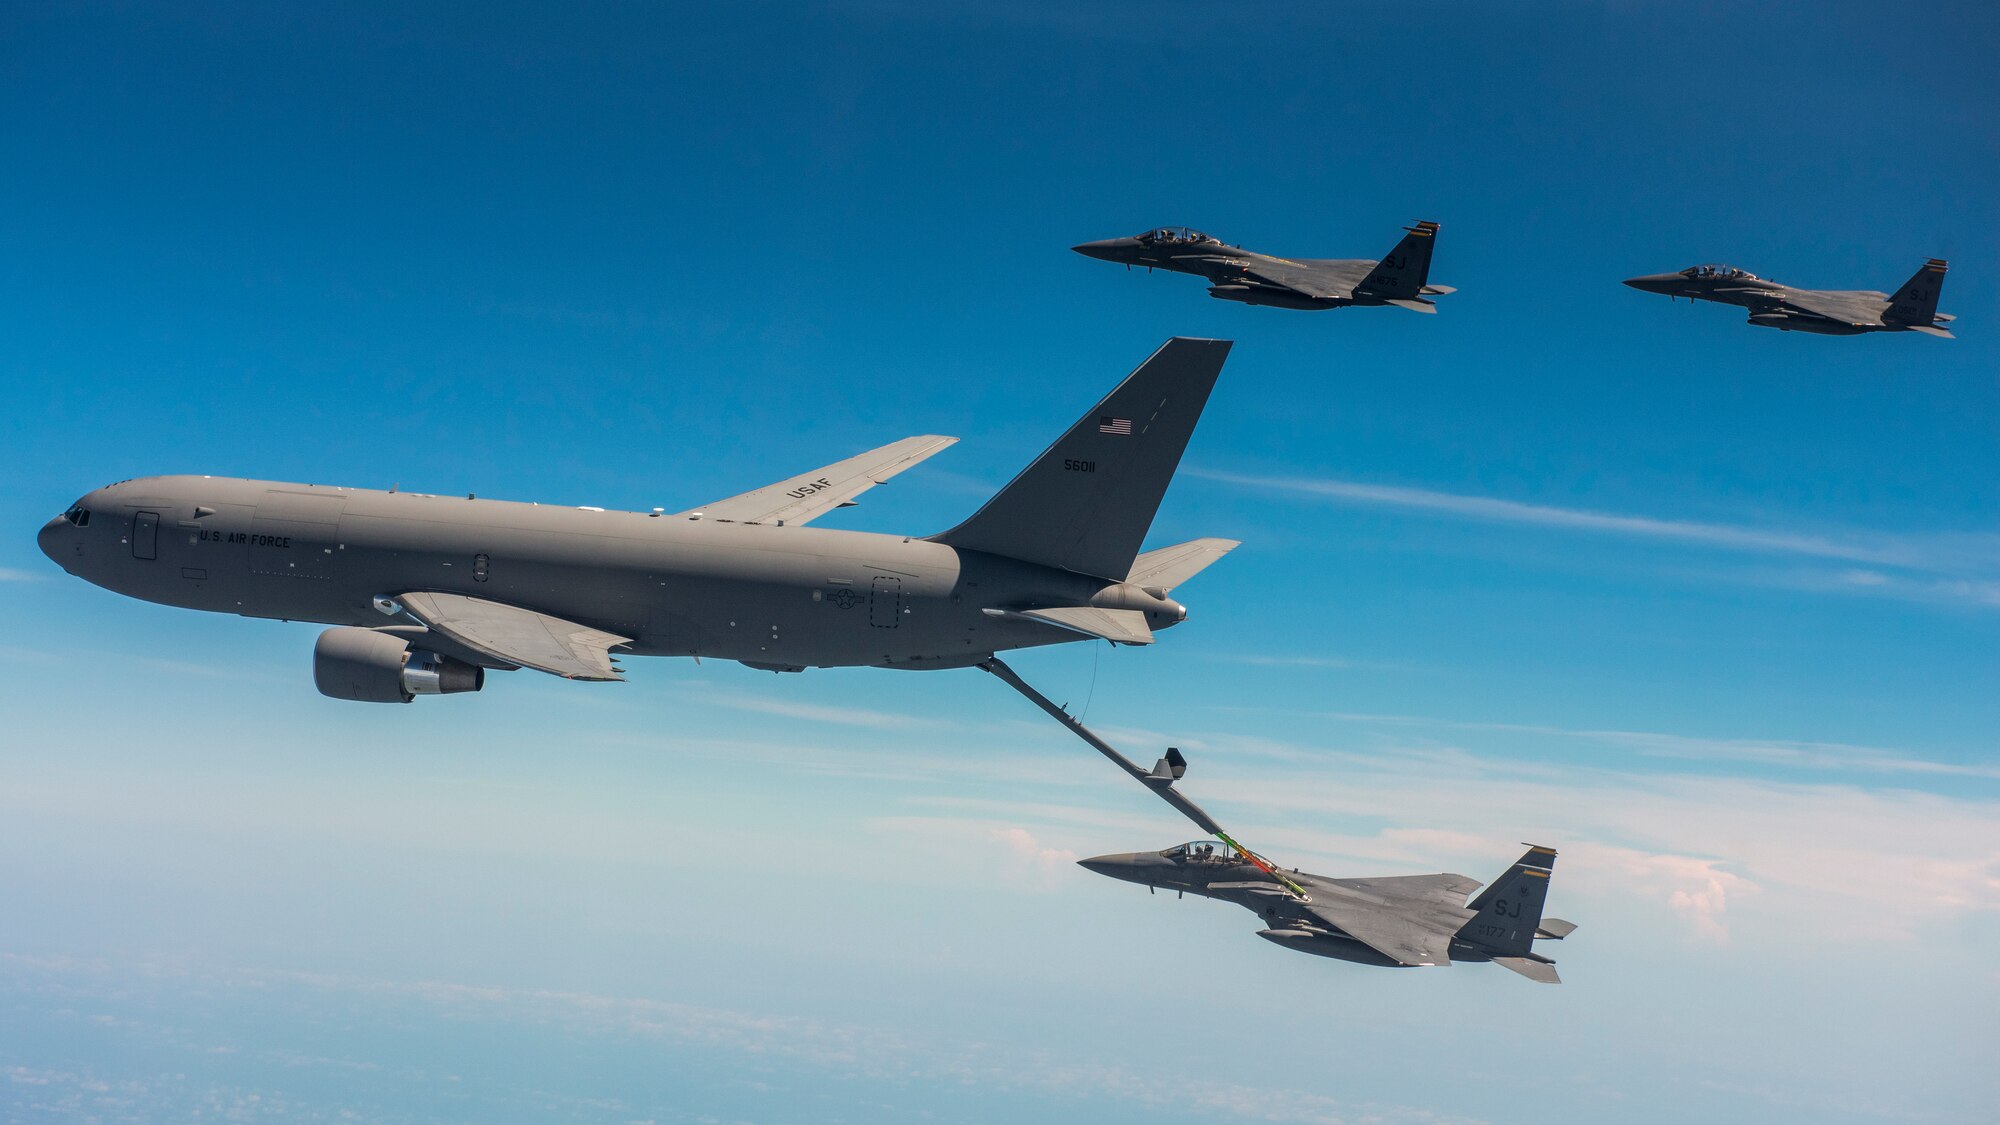 A KC-46 Pegasus from the 916th Air Refueling Wing in-air refuels F-15E Strike Eagles from the 336th Fighter Squadron at Seymour Johnson Air Force Base over the sky of North Carolina.